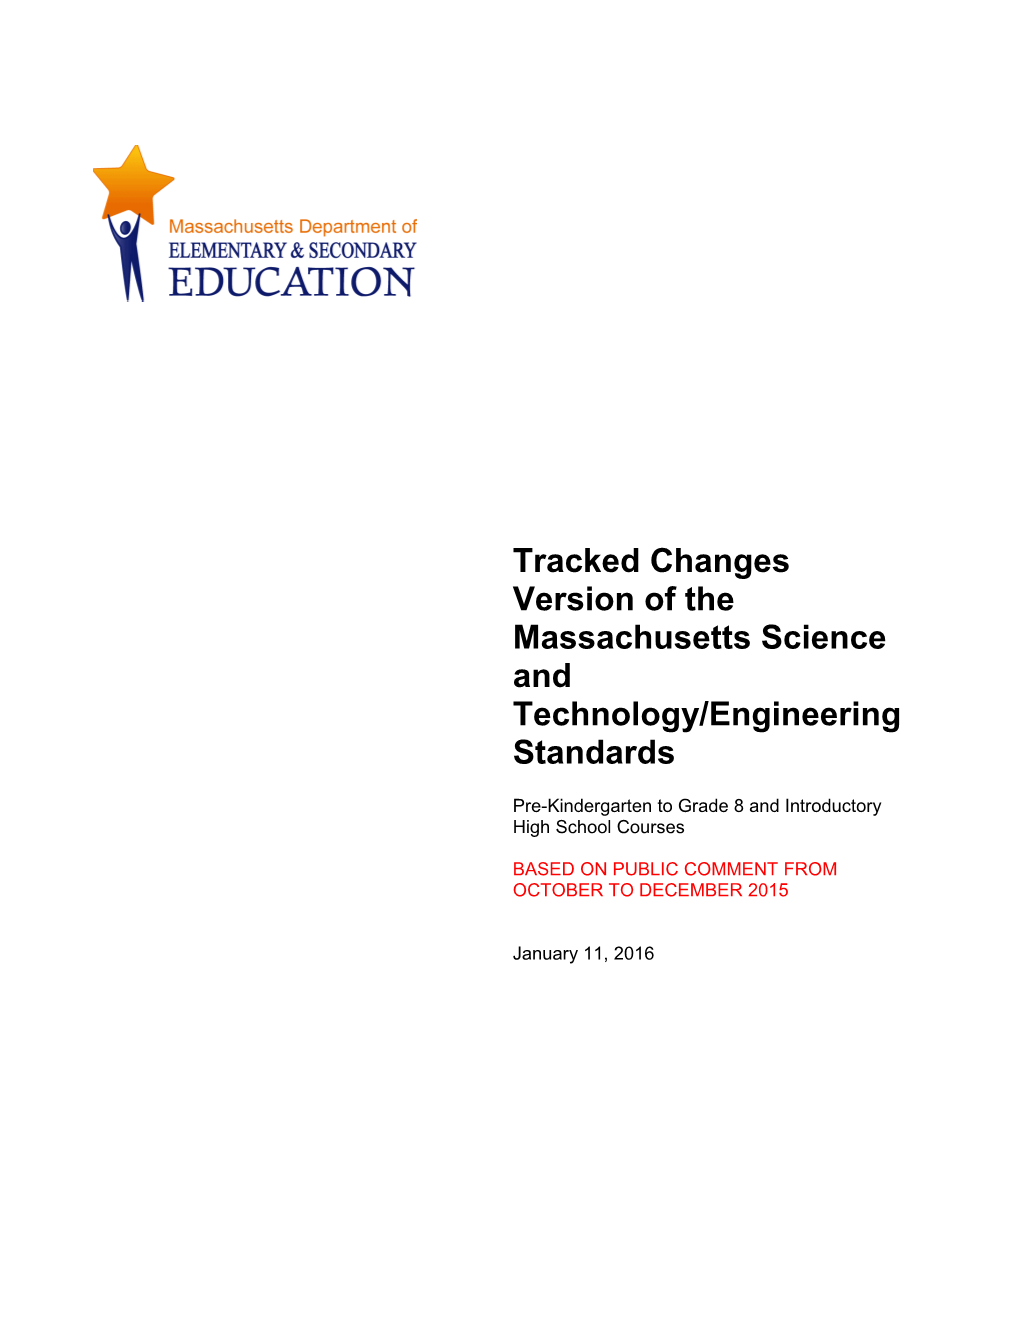 MA Draft Revised STE Standards for Adoption, January 2016 - Tracked Version